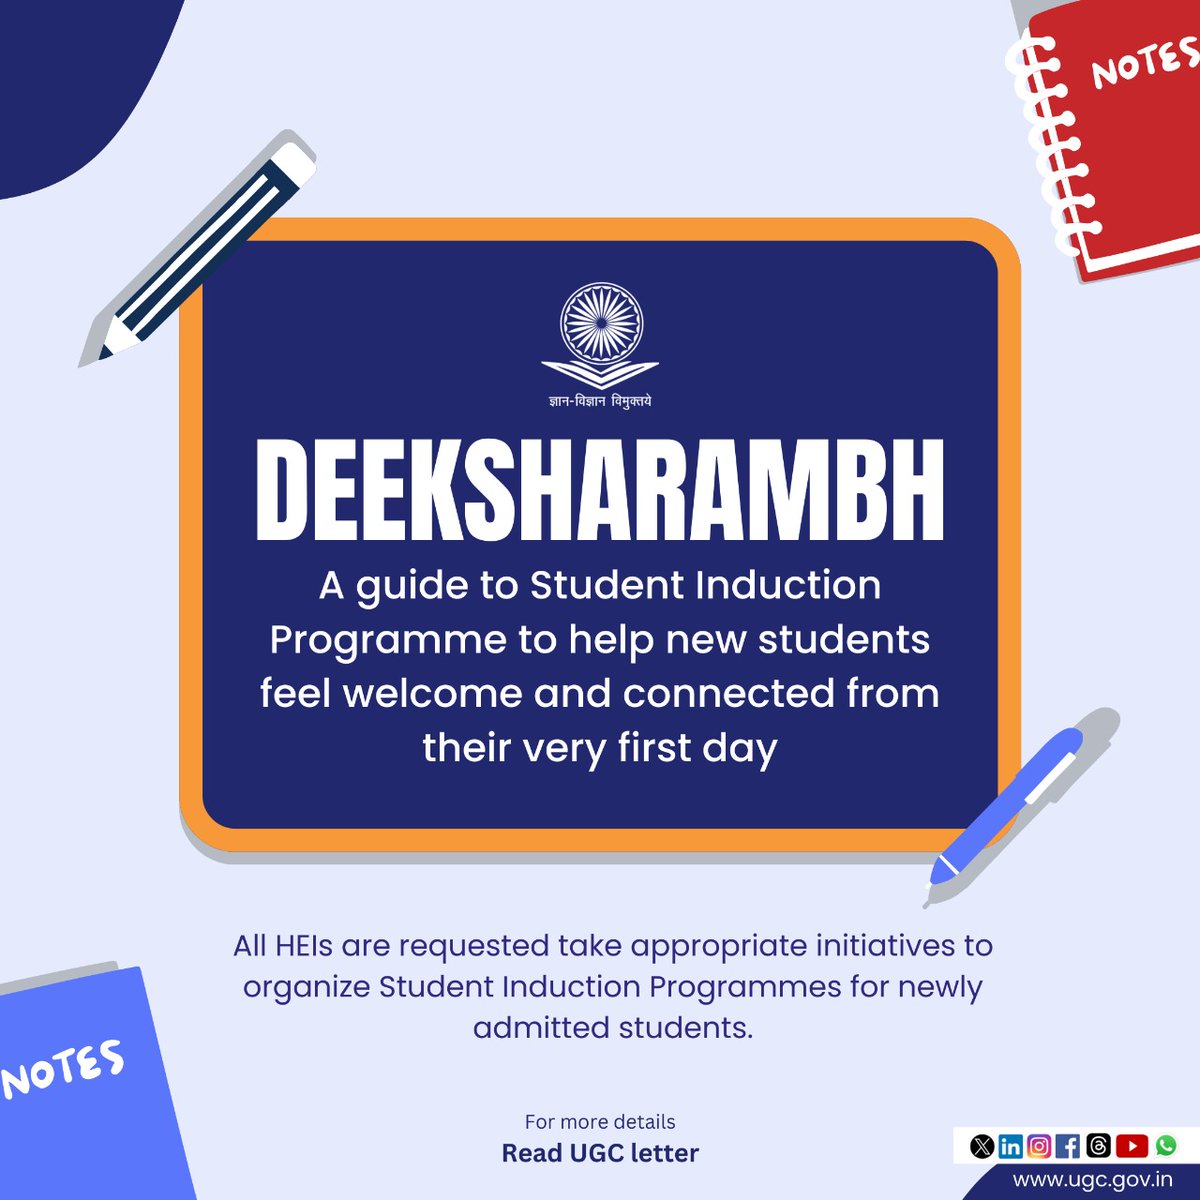 UGC letter regarding 'Deeksharambh'- A guide to Student Induction Programme which can be accessed at: ugc.gov.in/e-book/DEEKSHA…, to make the transition from Secondary to College/University effortless. Read here: ugc.gov.in/pdfnews/060107… @PMOIndia @EduMinOfIndia @PIB_India